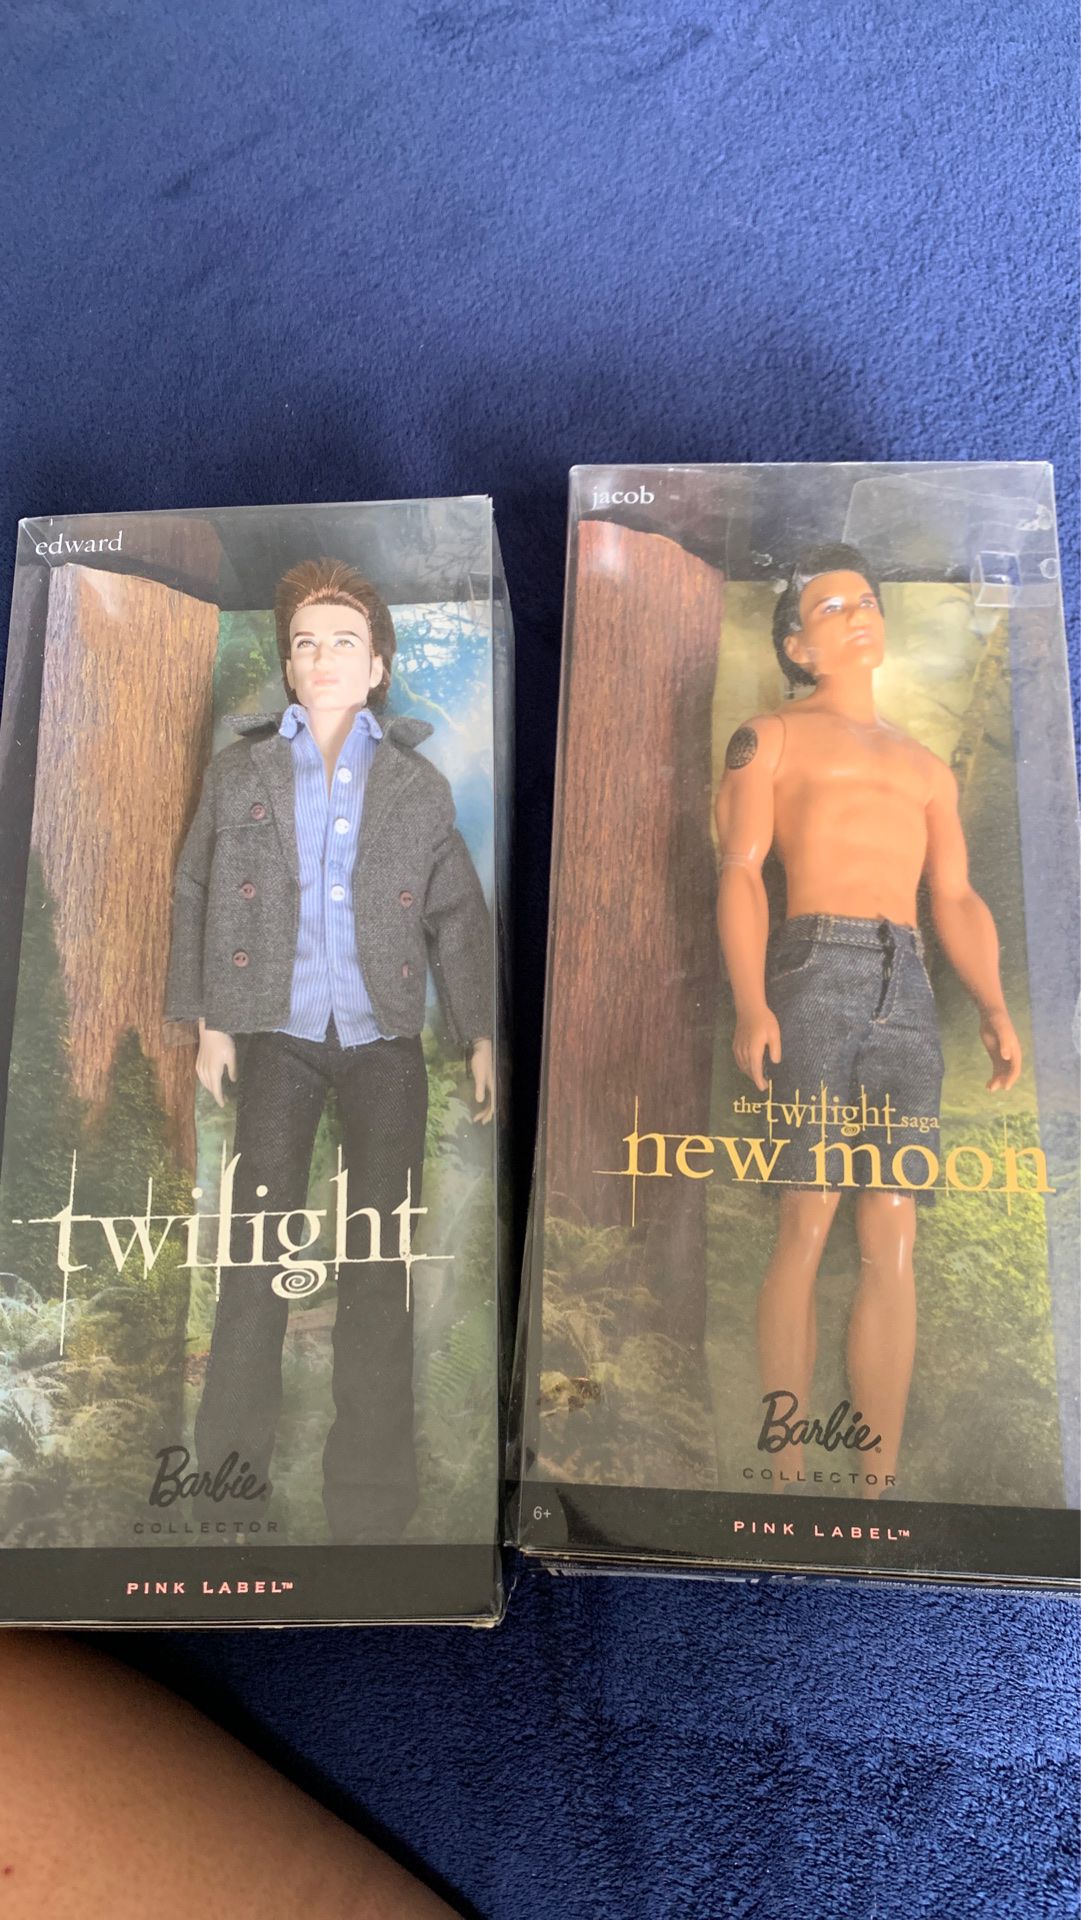 Twilight and New moon, Edward & Jacob collectables